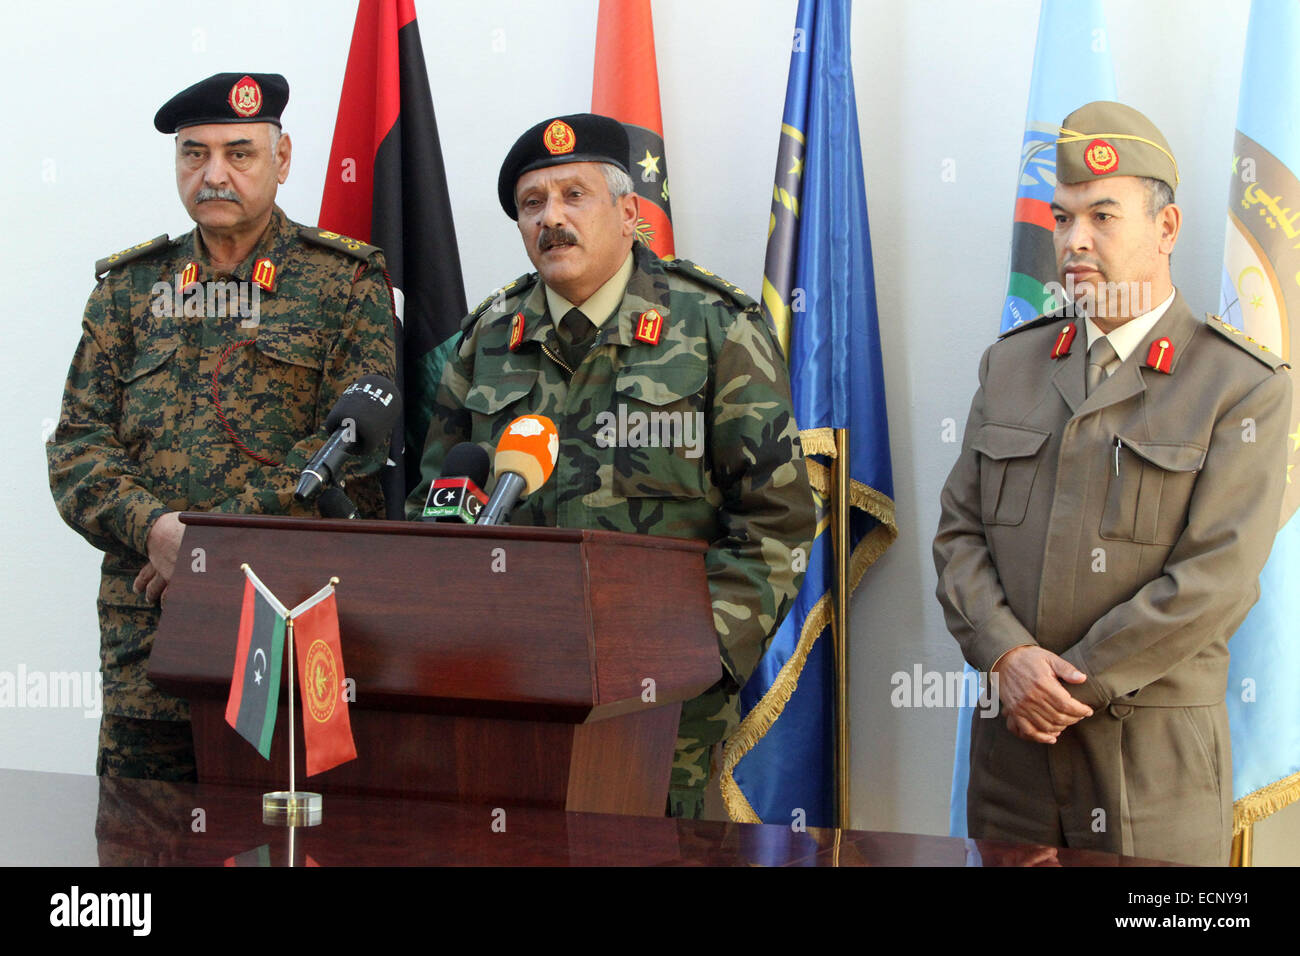 Tripoli, Libya. 17th Dec, 2014. Major-General Abdessalem Jadallah al-Obeidi (C), chief of the expired General National Congress's army attends a news conference in Tripoli, Libya, Dec. 17, 2014. During the news conference, Obeidi announced that a joint military operation chamber was formed to control military operations in Libya. Obeidi was sacked by the Libyan new parliament House of Representatives as the chief of staff but still recognized by the expired General National Congress. Credit:  Hamza Turkia/Xinhua/Alamy Live News Stock Photo